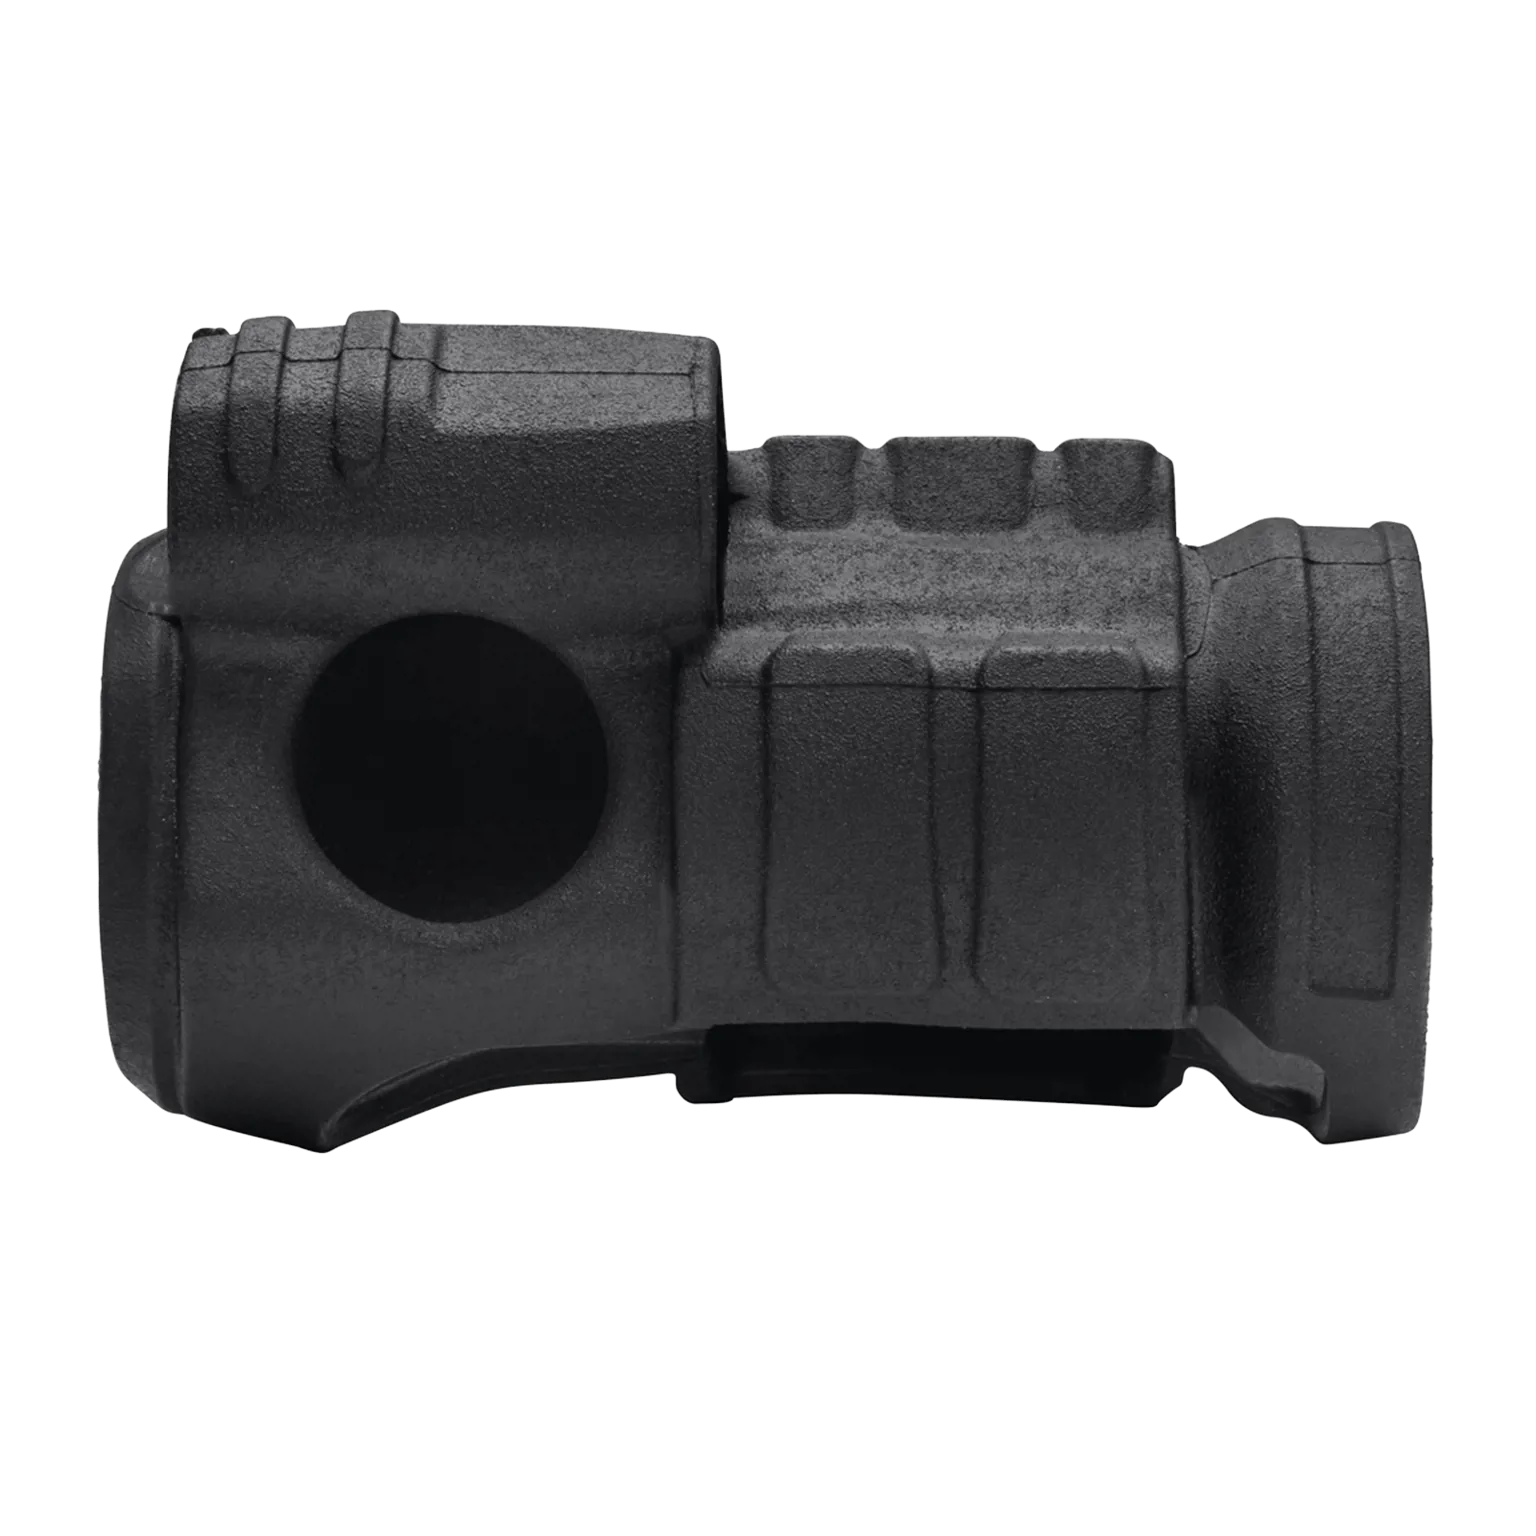 Outer rubber cover - Black for Aimpoint® CompM3/ML3  - 2